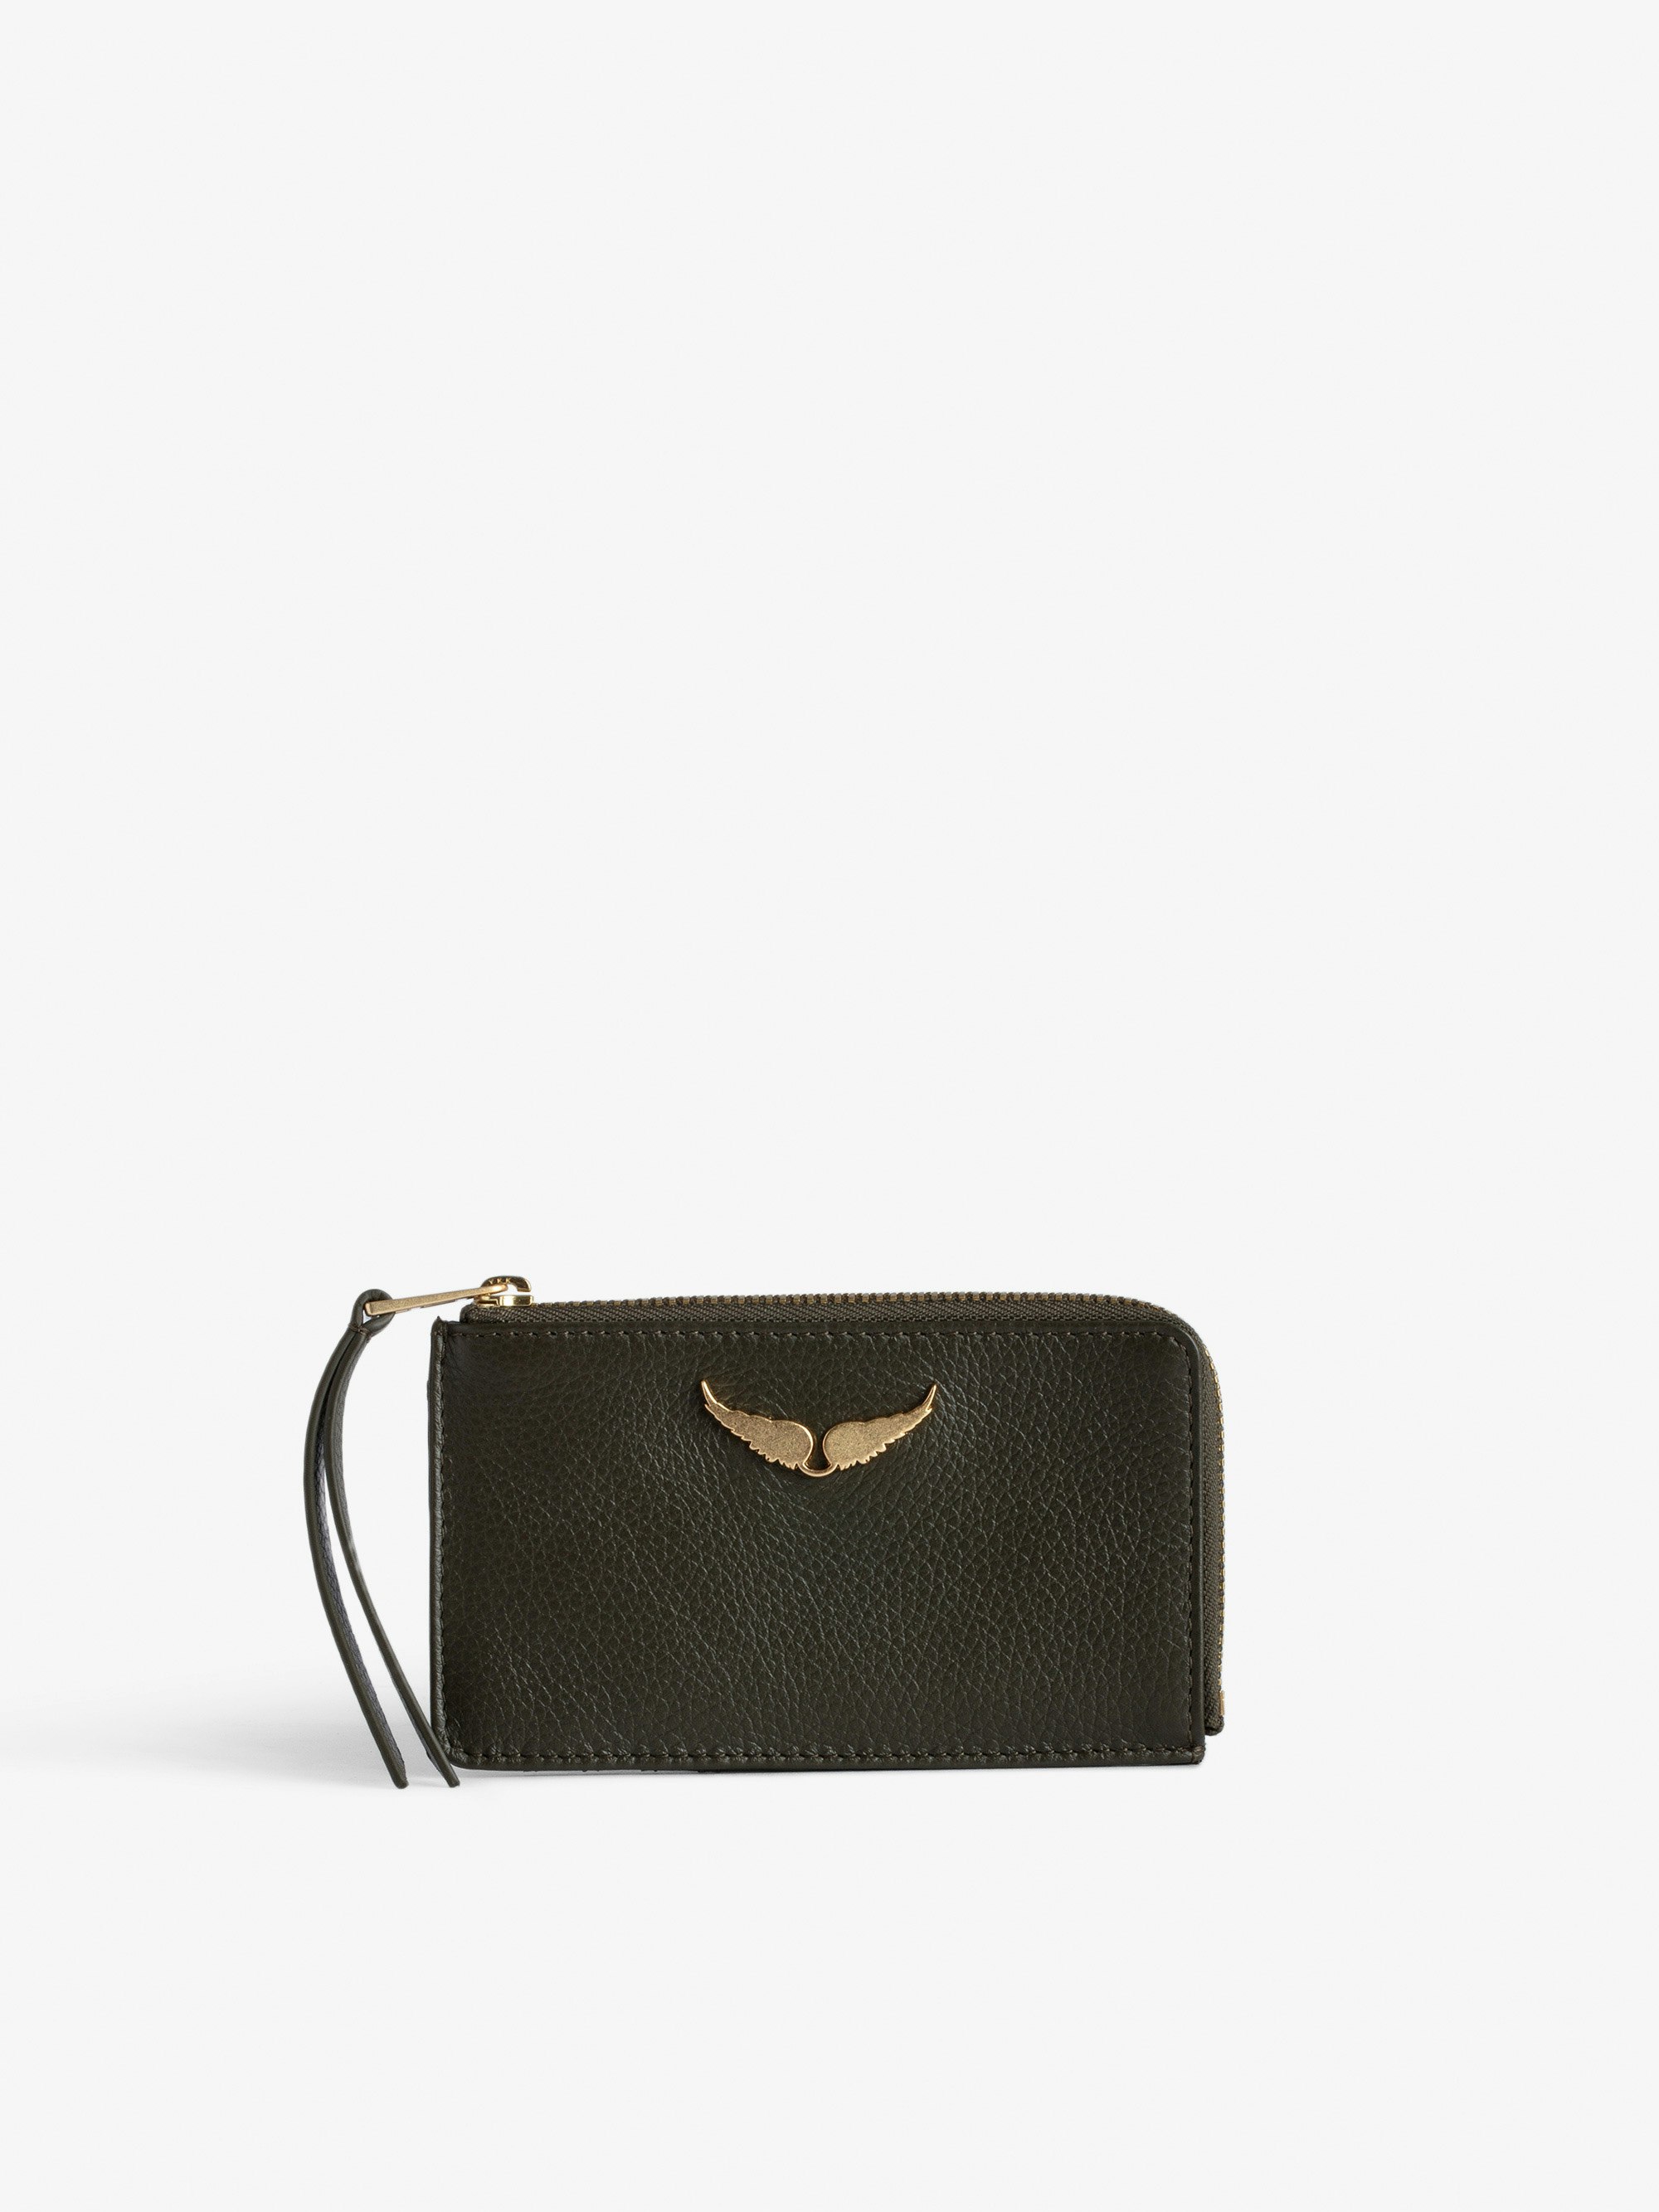 ZV Card Card Holder - Women’s khaki grained leather card holder with wings charm.